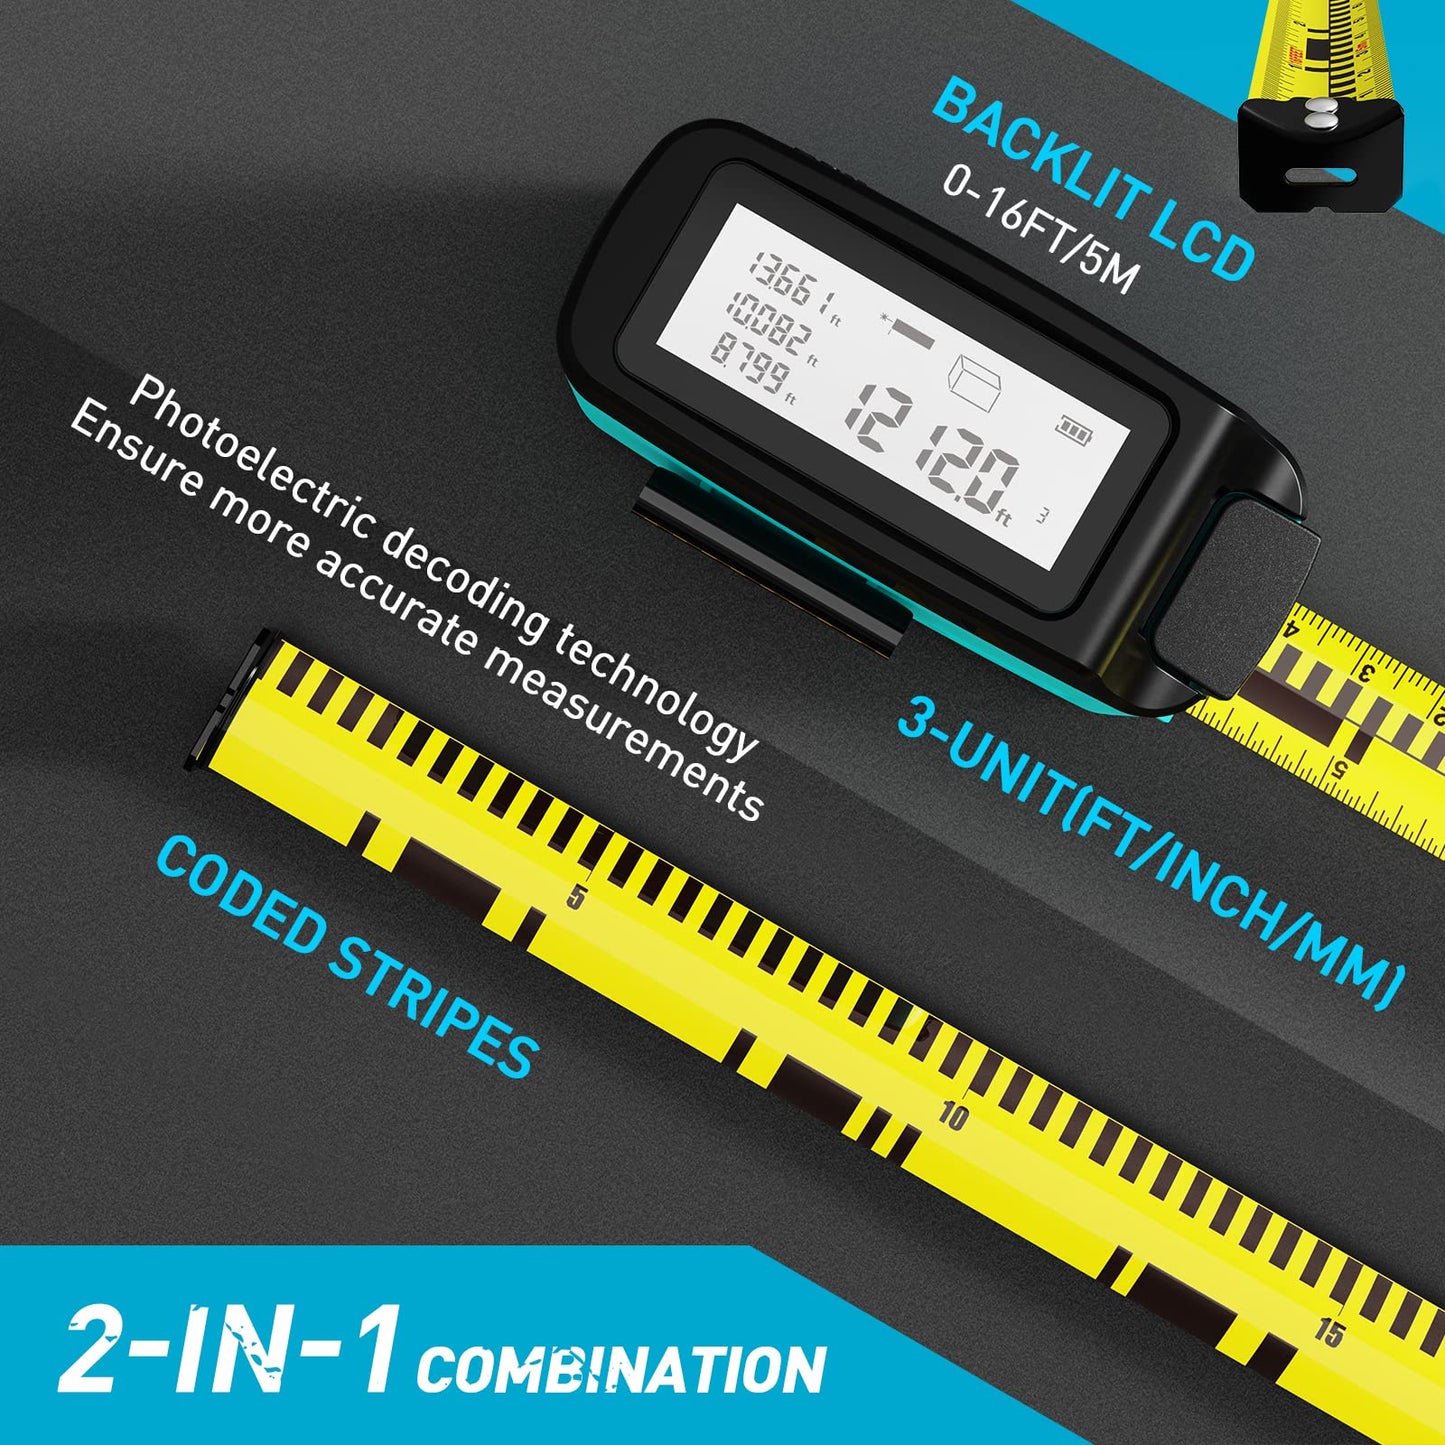 2-in-1 Digital Tape Measure - Ft/Ft+in/in/M 16Ft Tape Measure, Backlit Display USB Rechargeable Tape Measure with Display, 20 Groups Historical